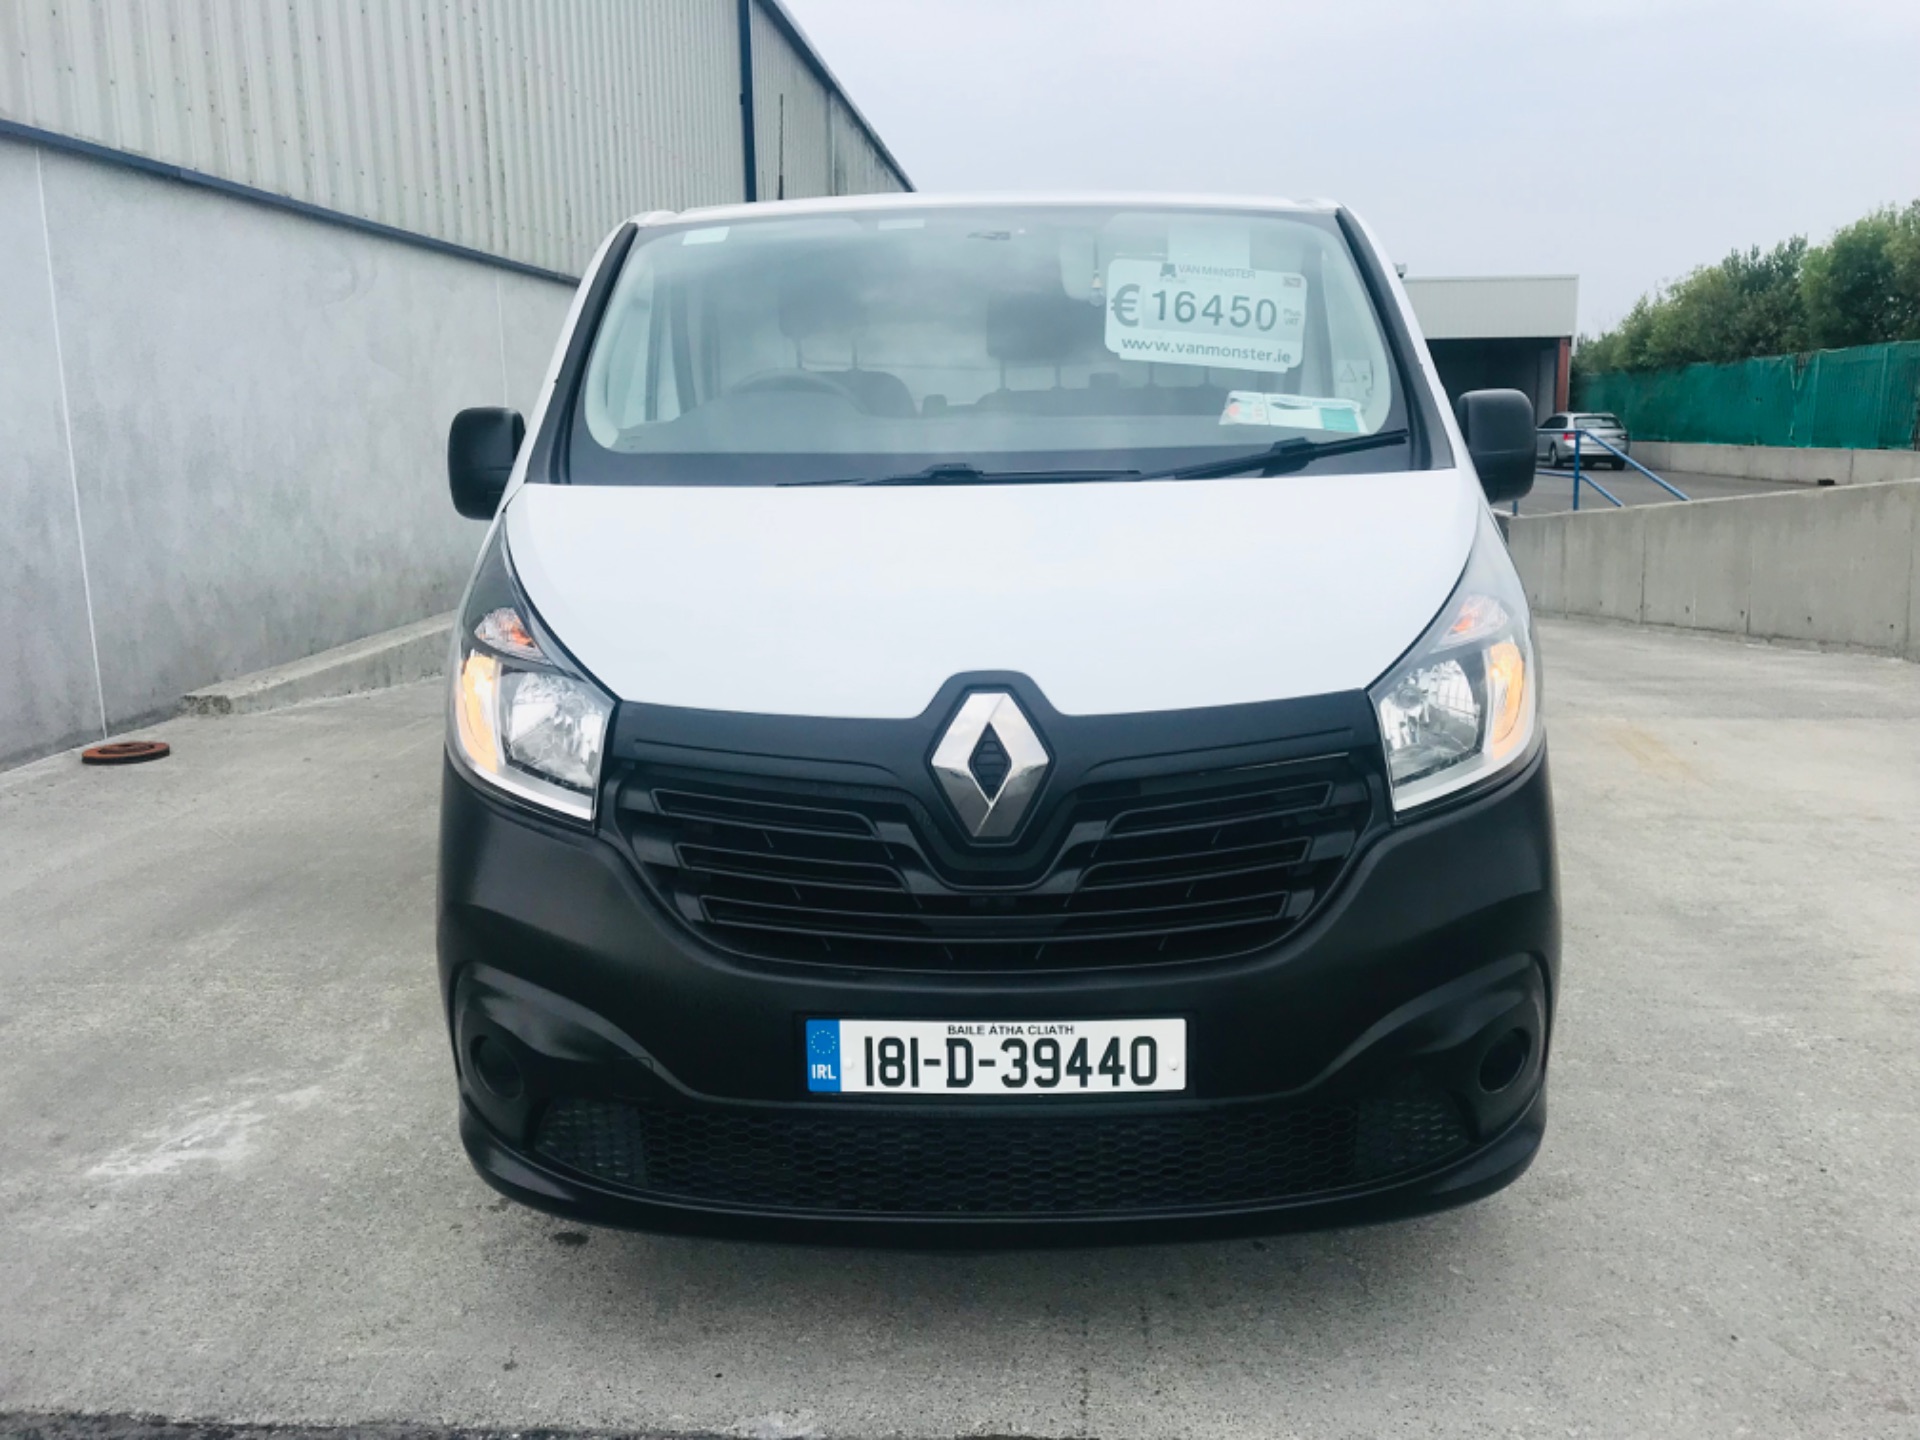 2018 Renault Trafic LL29 DCI 120 Business 3DR (181D39440) Image 2